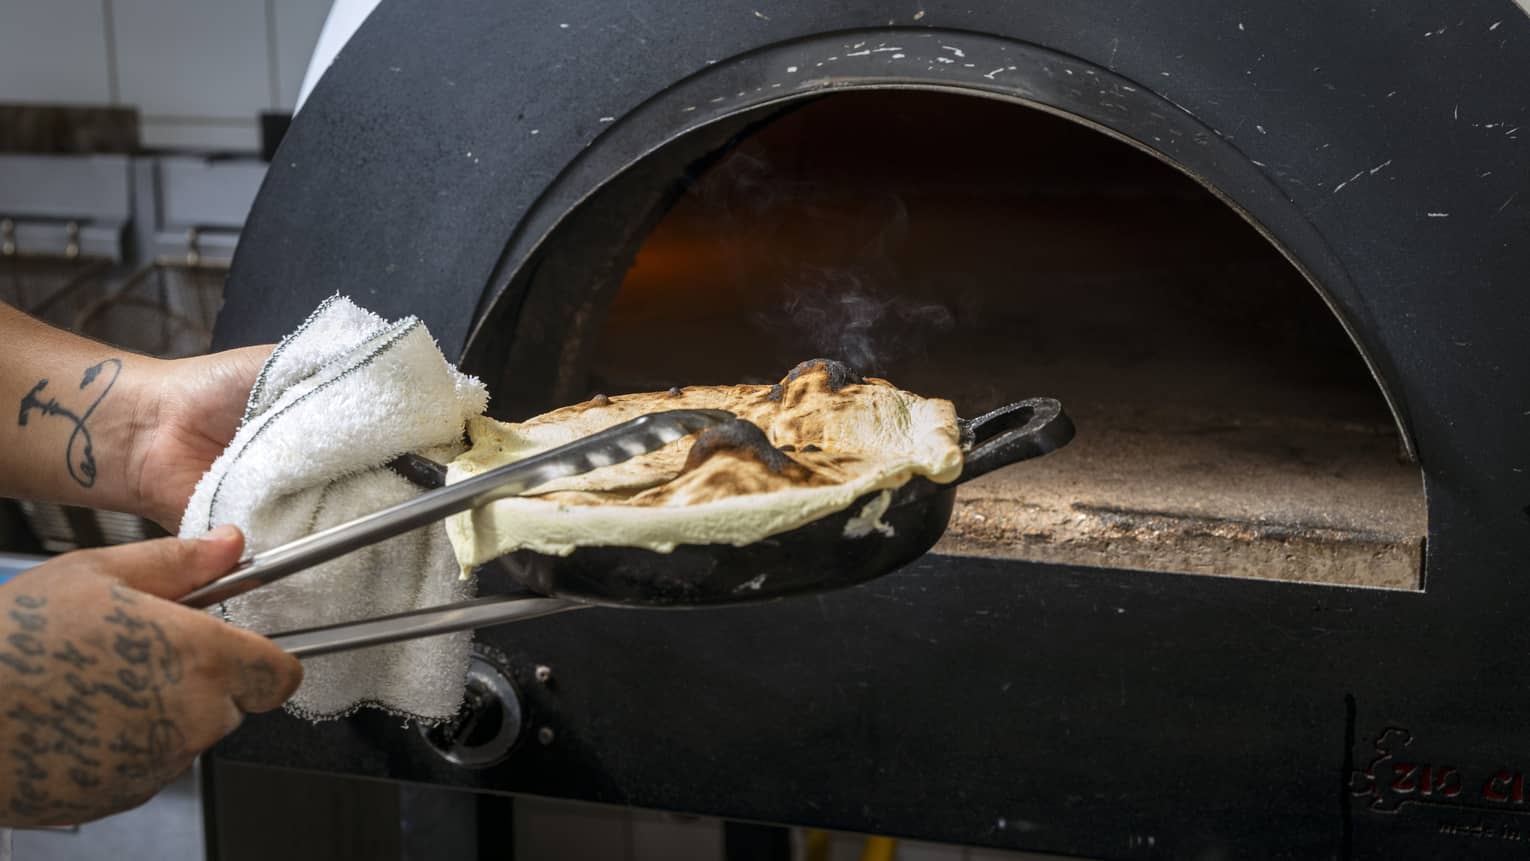 Tattooed hands pull a fresh-baked pita out of a wood oven